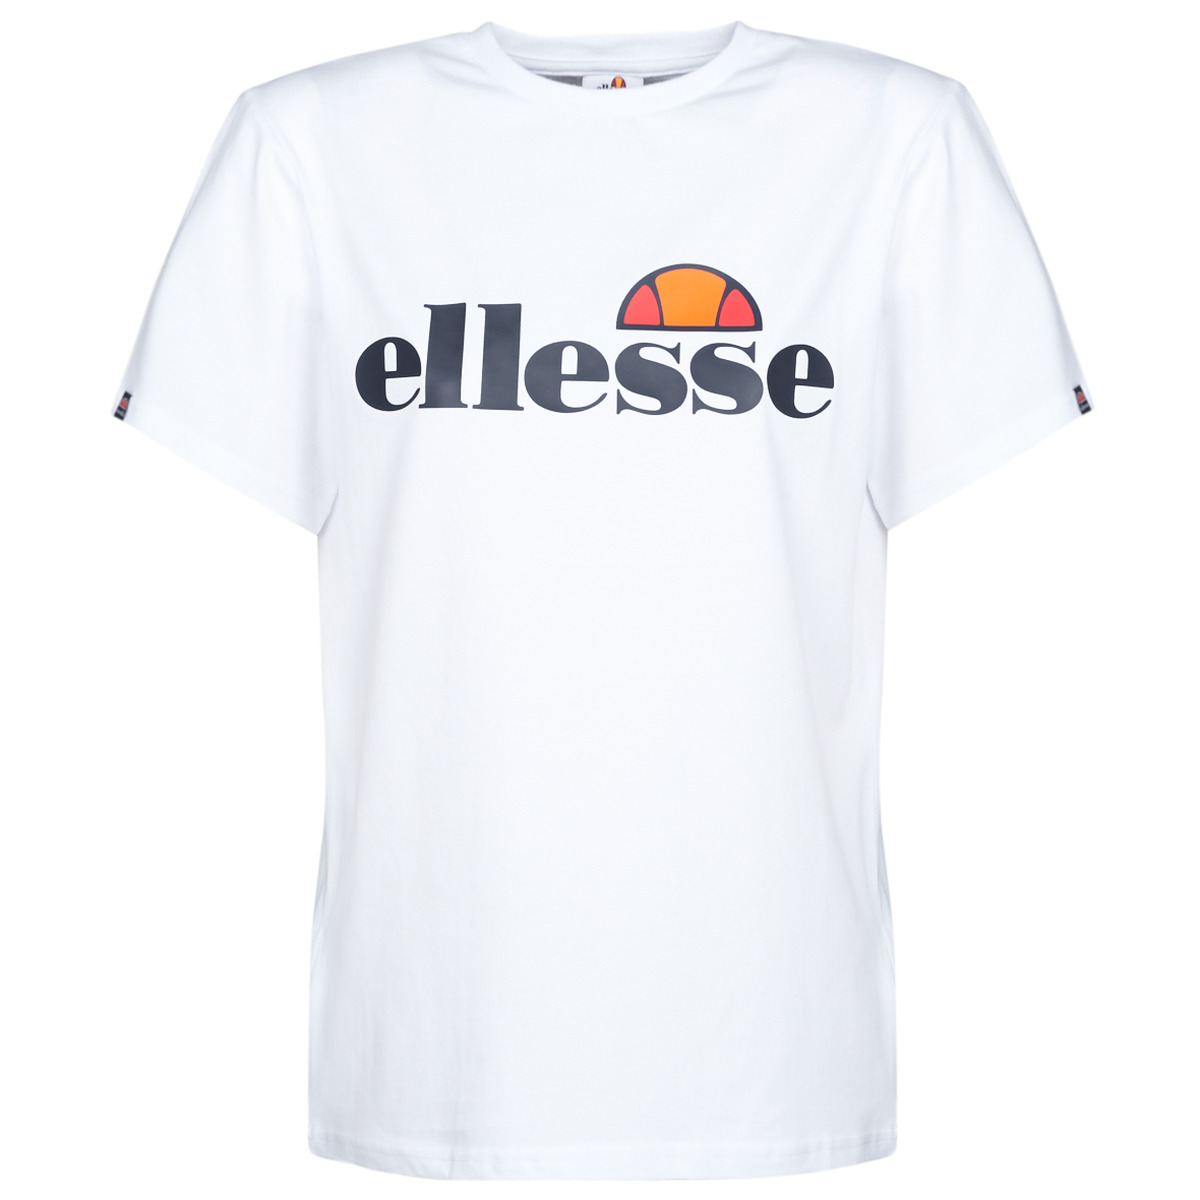 Beweren filosofie Statistisch Ellesse ALBANY White - Free delivery | Spartoo NET ! - Clothing  short-sleeved t-shirts Women USD/$26.40